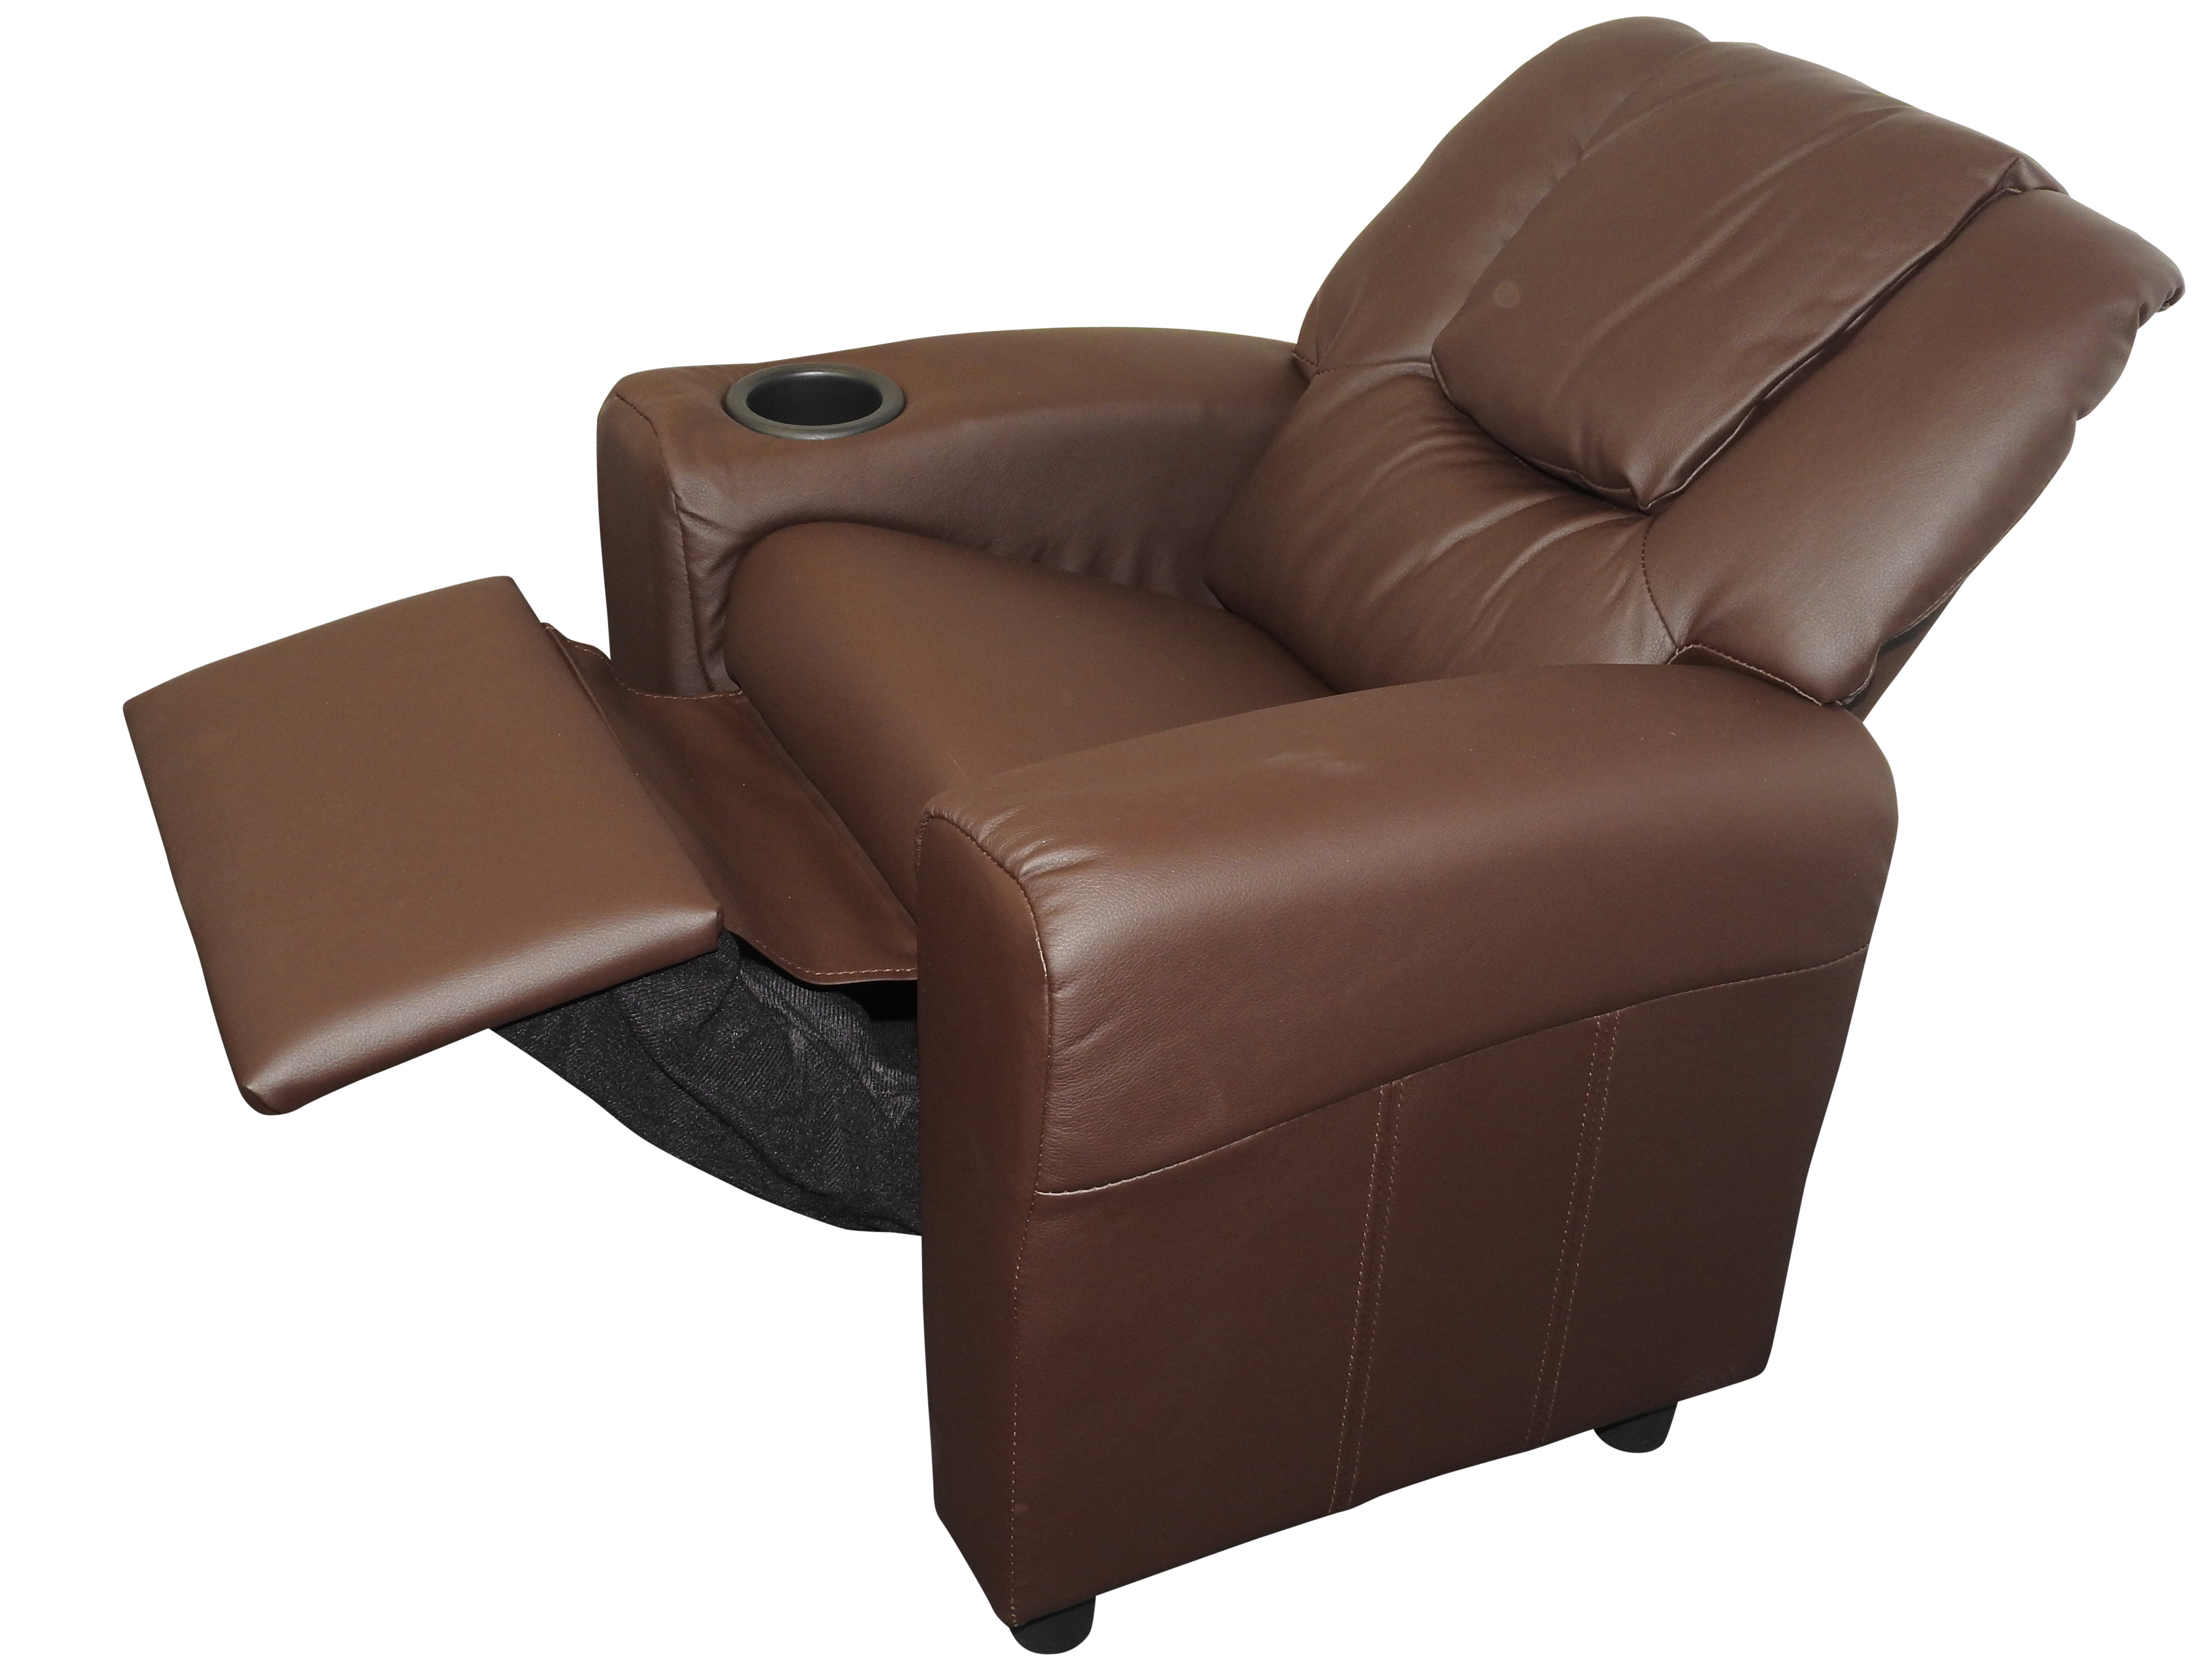 Baby Leather Recliner Chair Free, Baby Leather Recliner